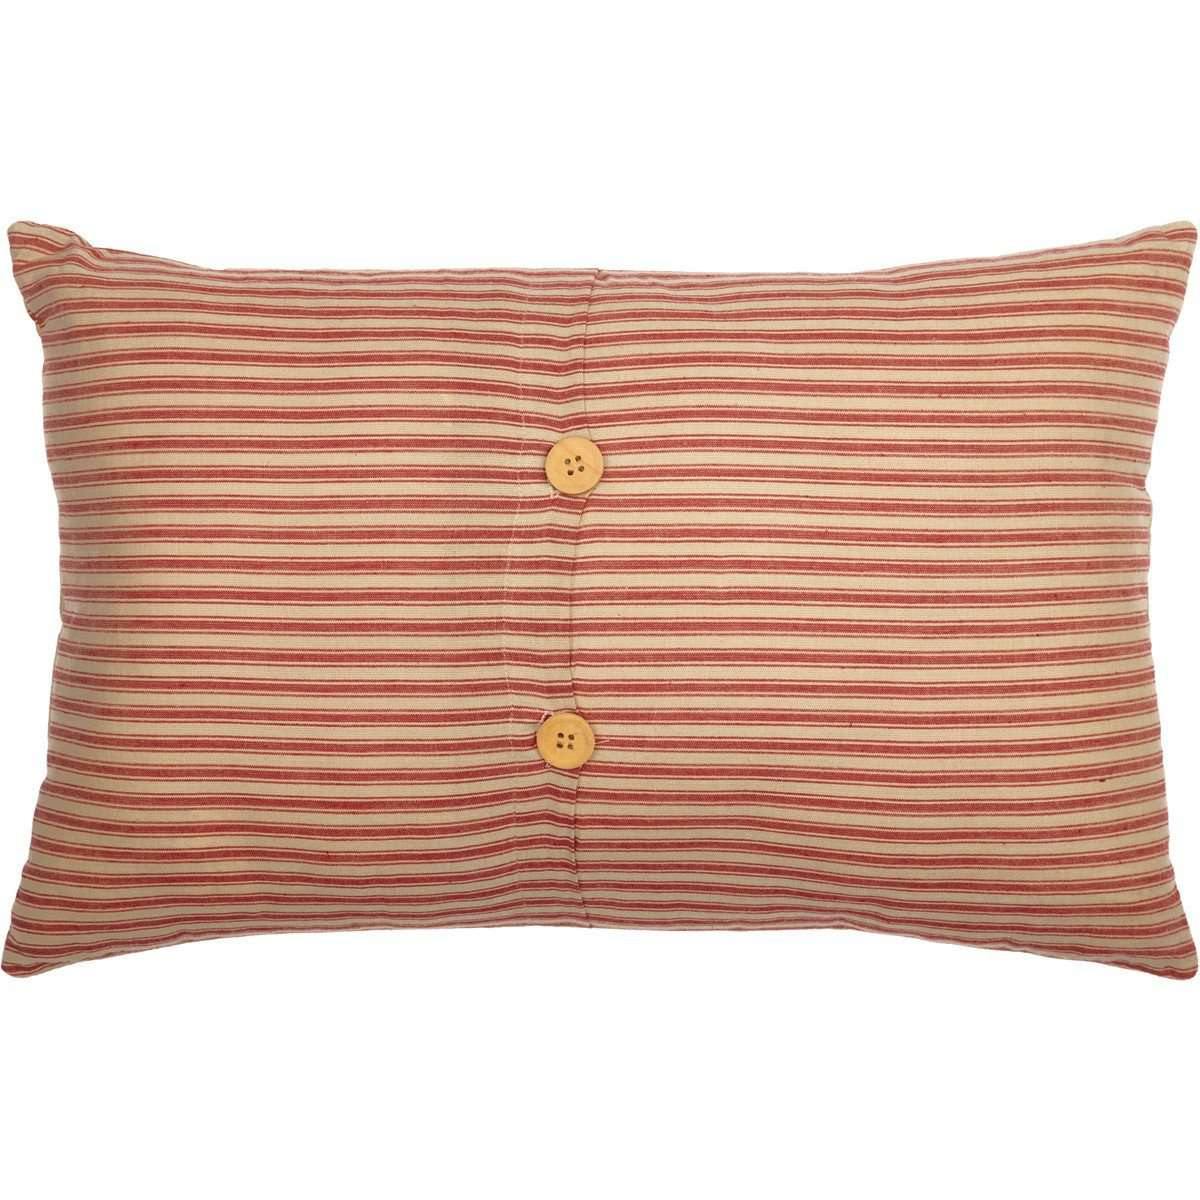 Rory Schoolhouse Red Farmhouse Pillow 14x22 VHC Brands back